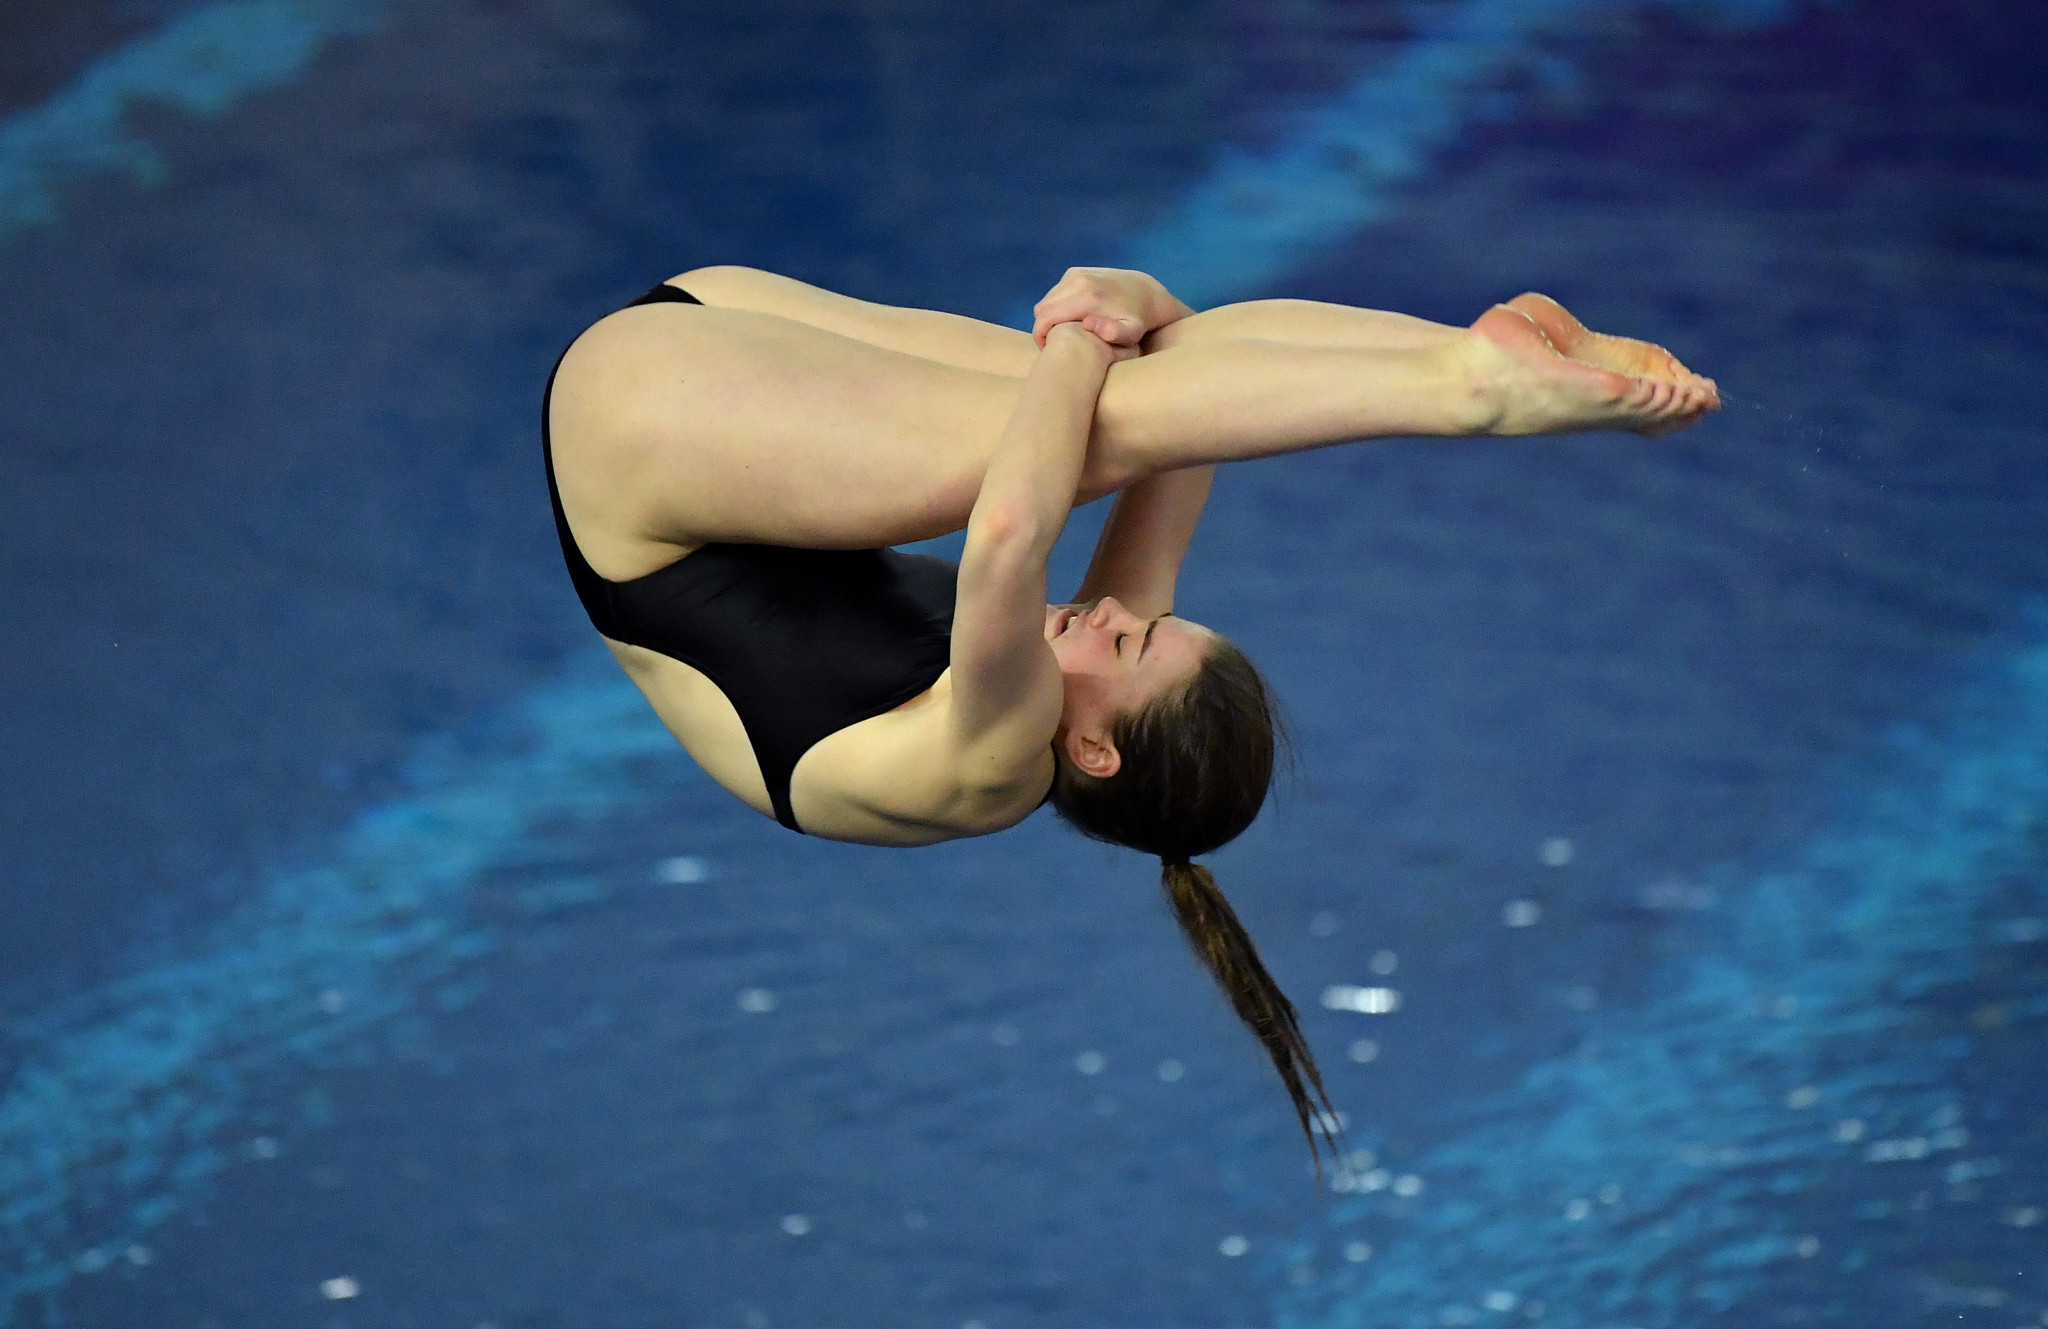 Britain’s Amy Rollinson secured a place in the top three in the women's 3m springboard preliminary round ©Getty Images